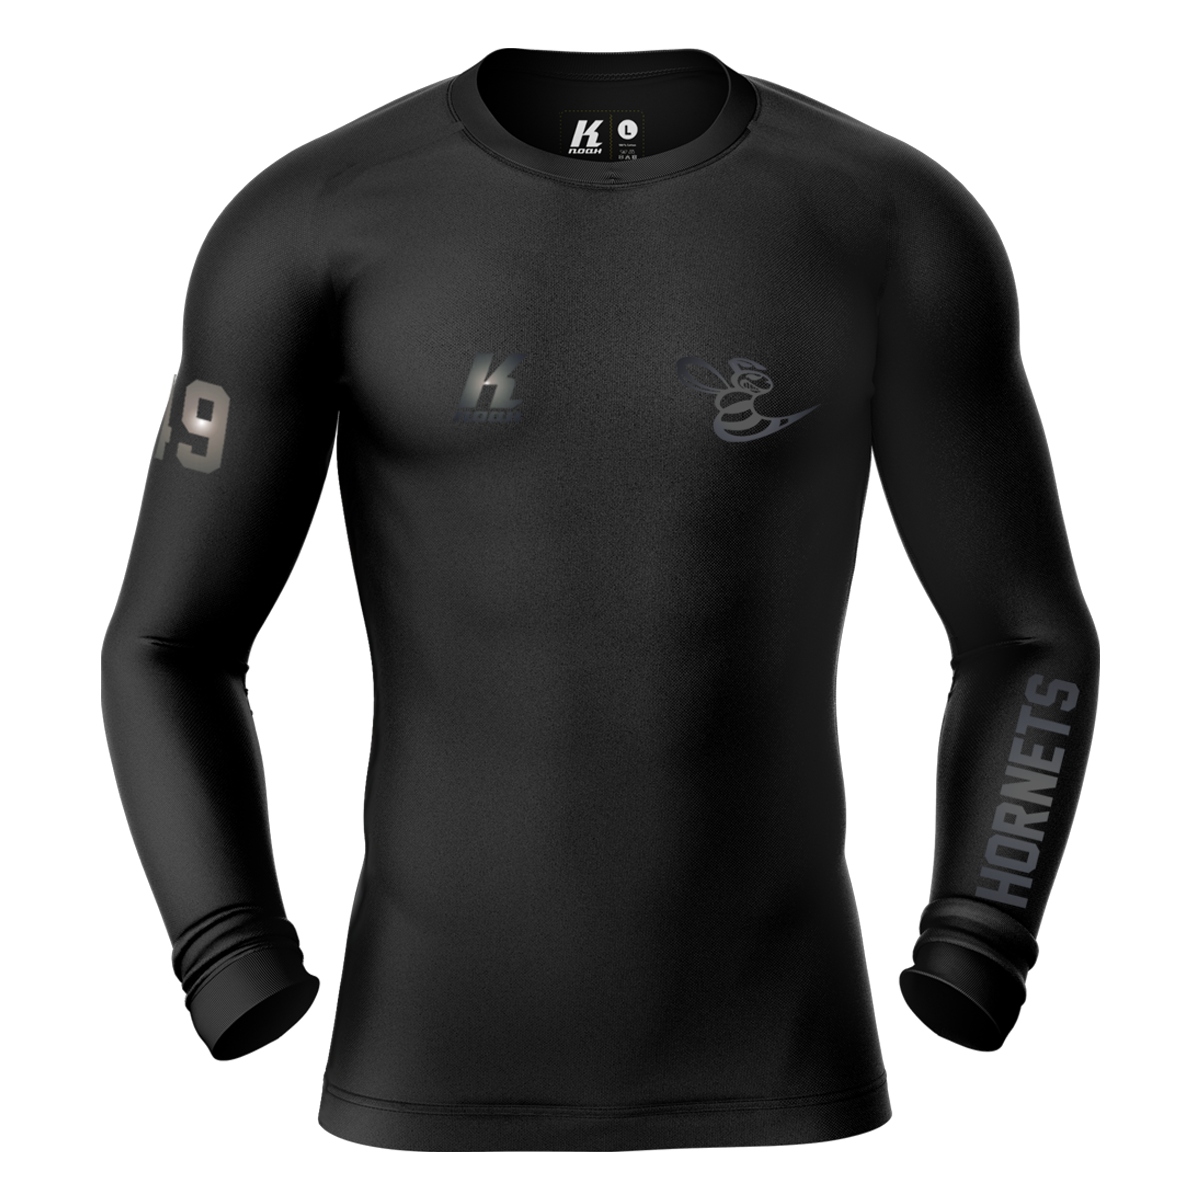 Hornets "Blackline" K.Tech Compression Longsleeve Shirt with Playernumber/Initials